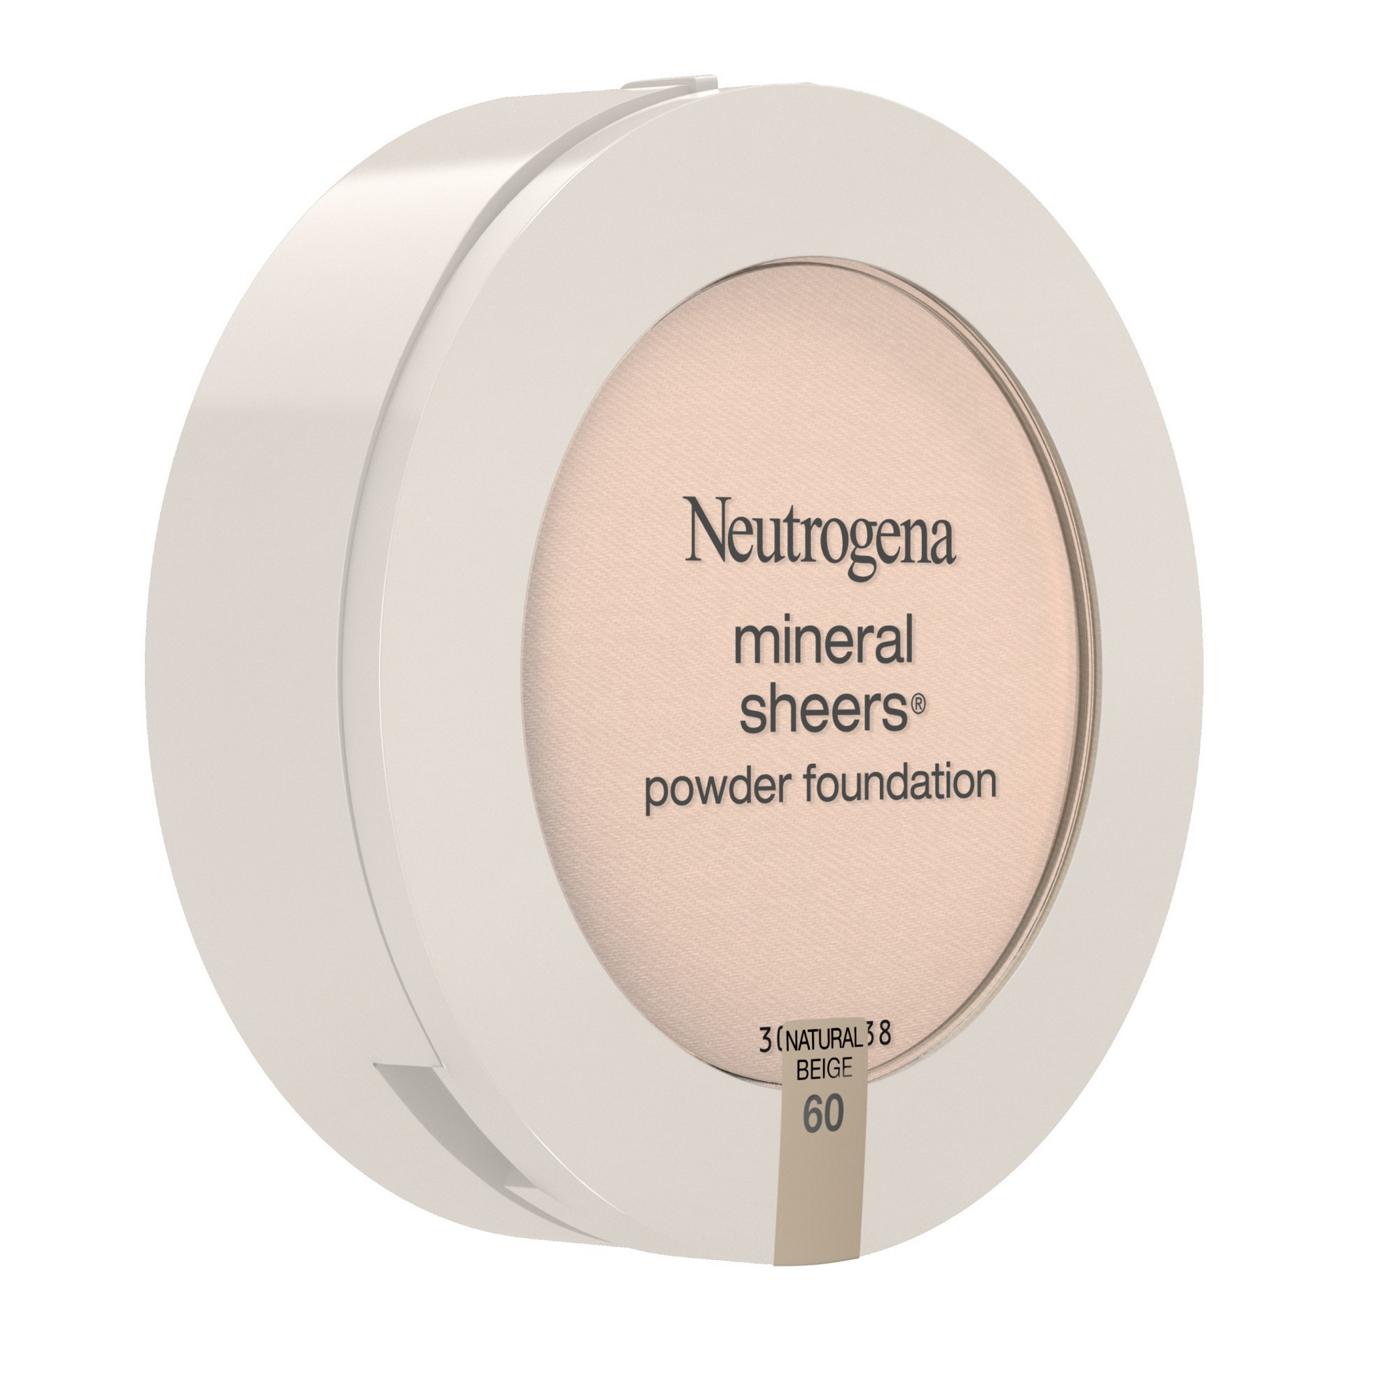 Neutrogena Mineral Sheers 60 Natural Beige Compact Powder Foundation; image 5 of 6